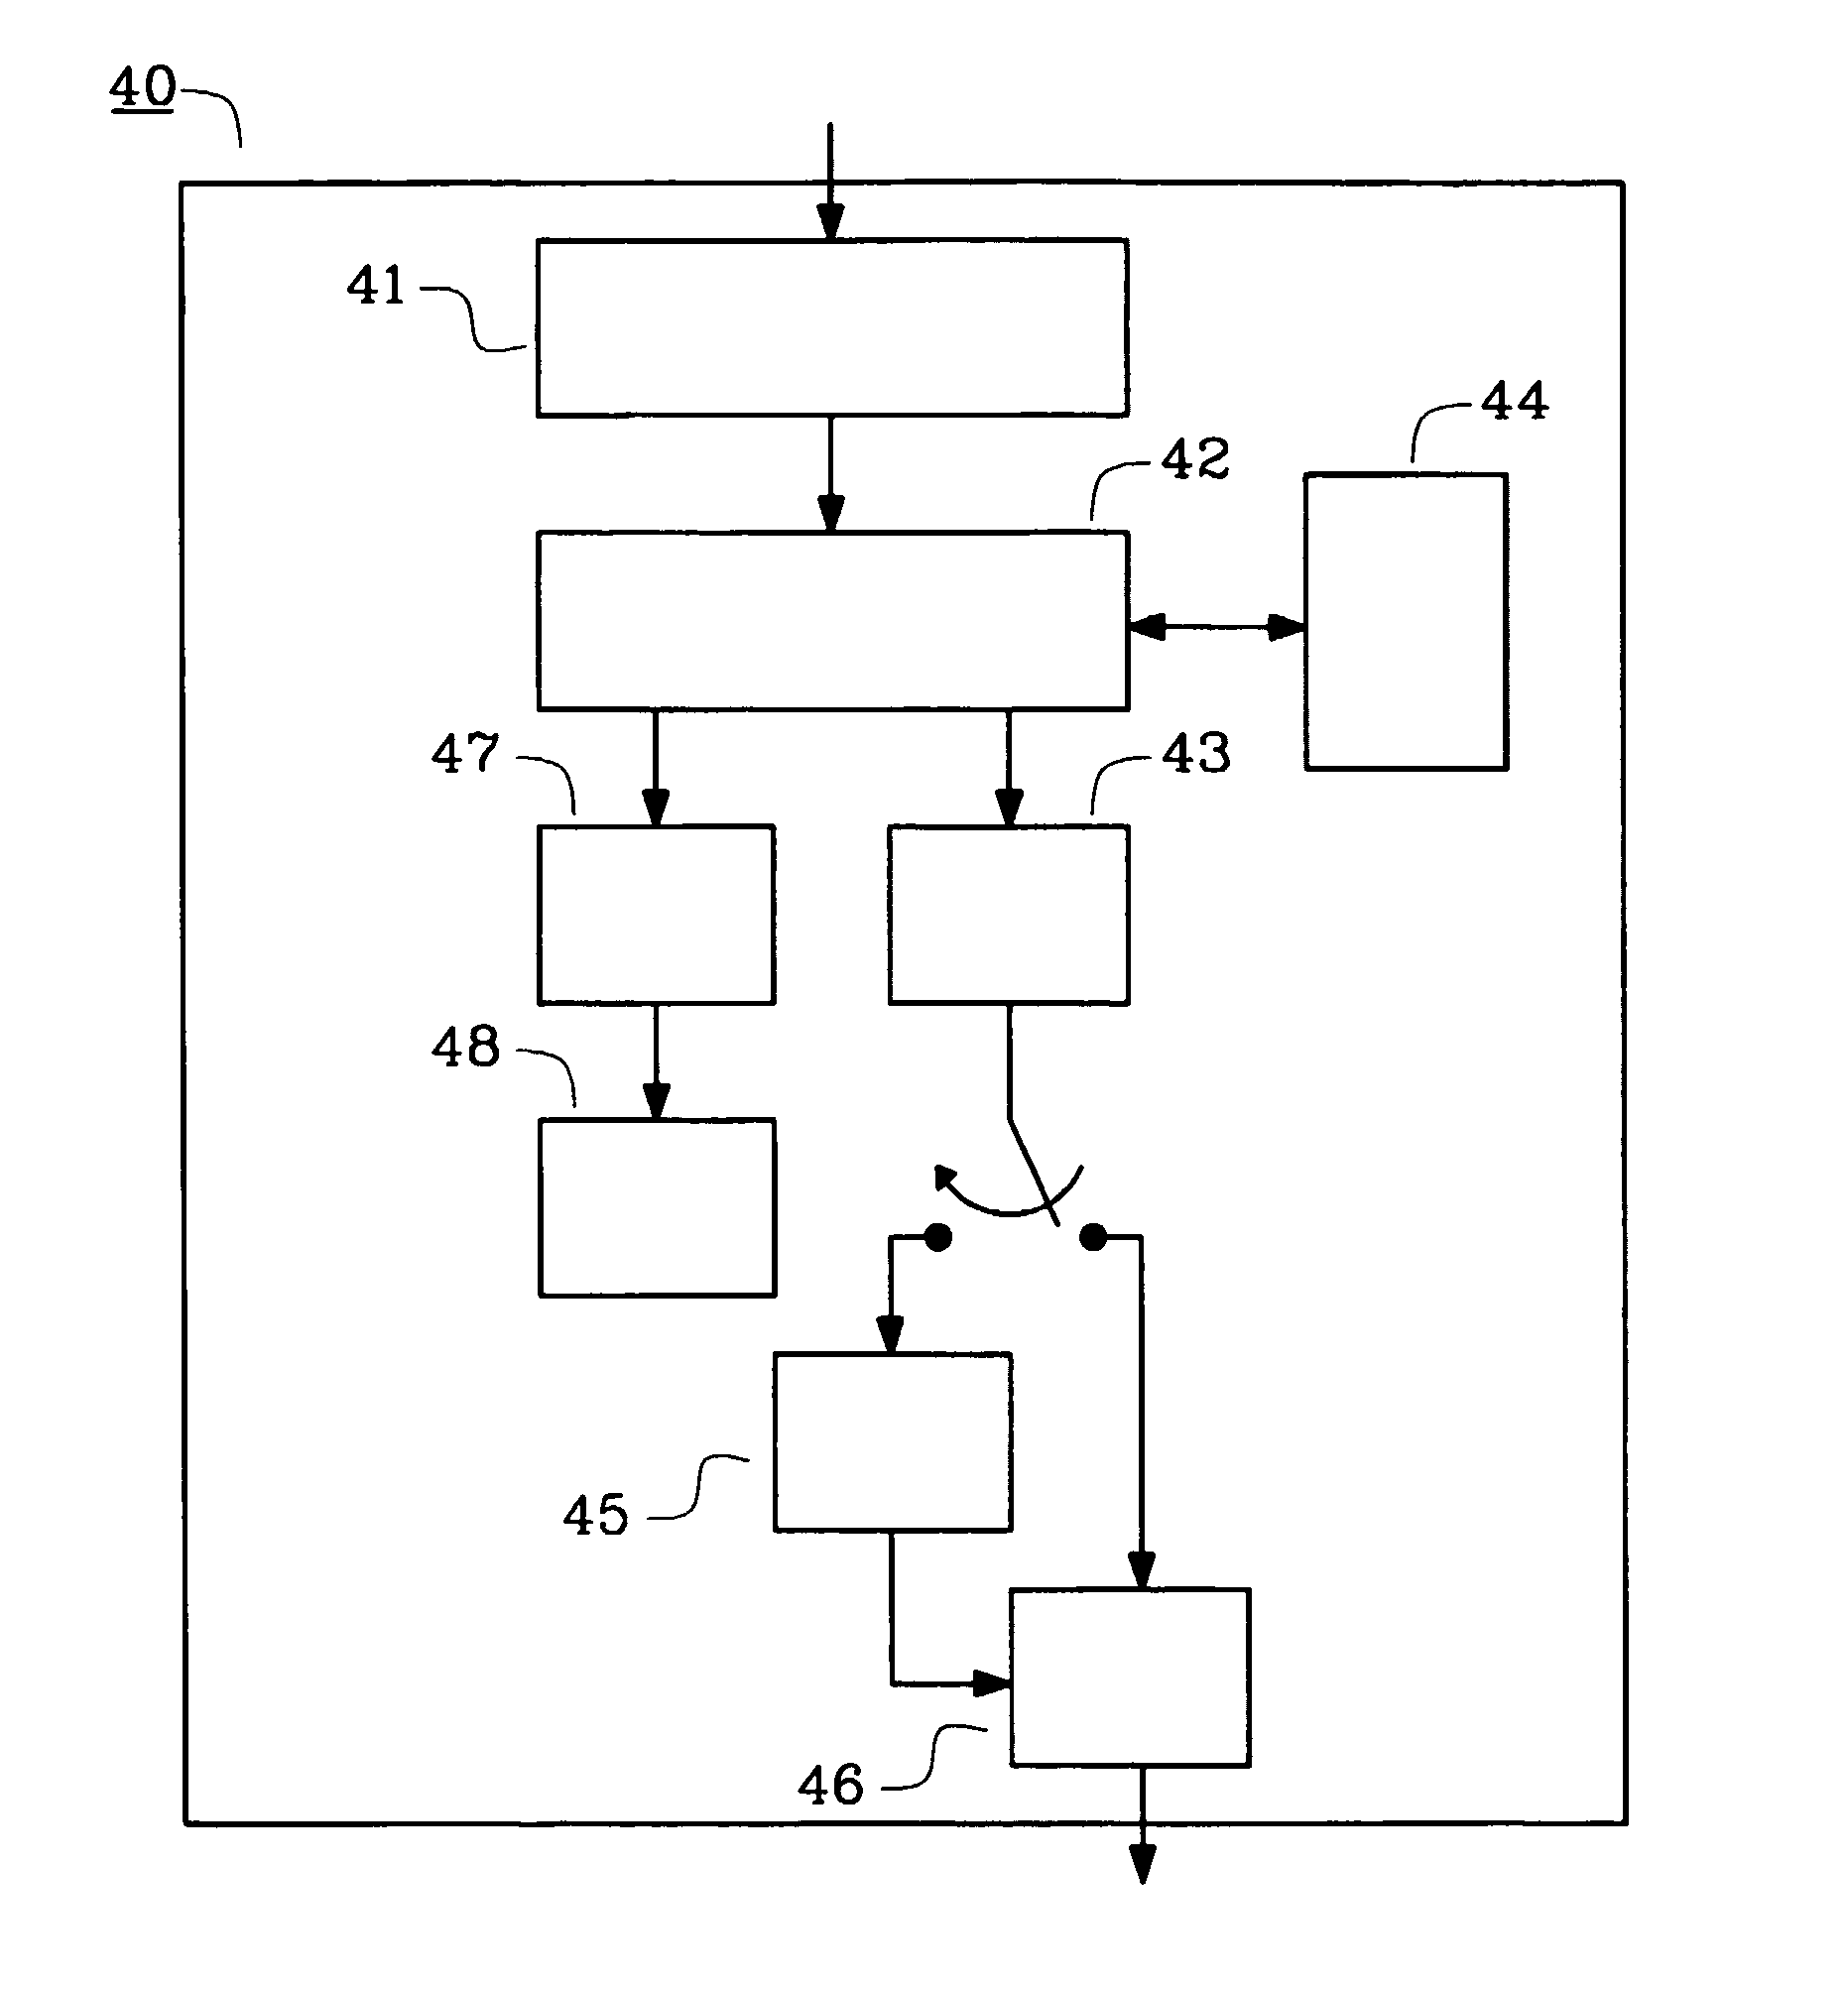 Method and arrangement for channel type switching